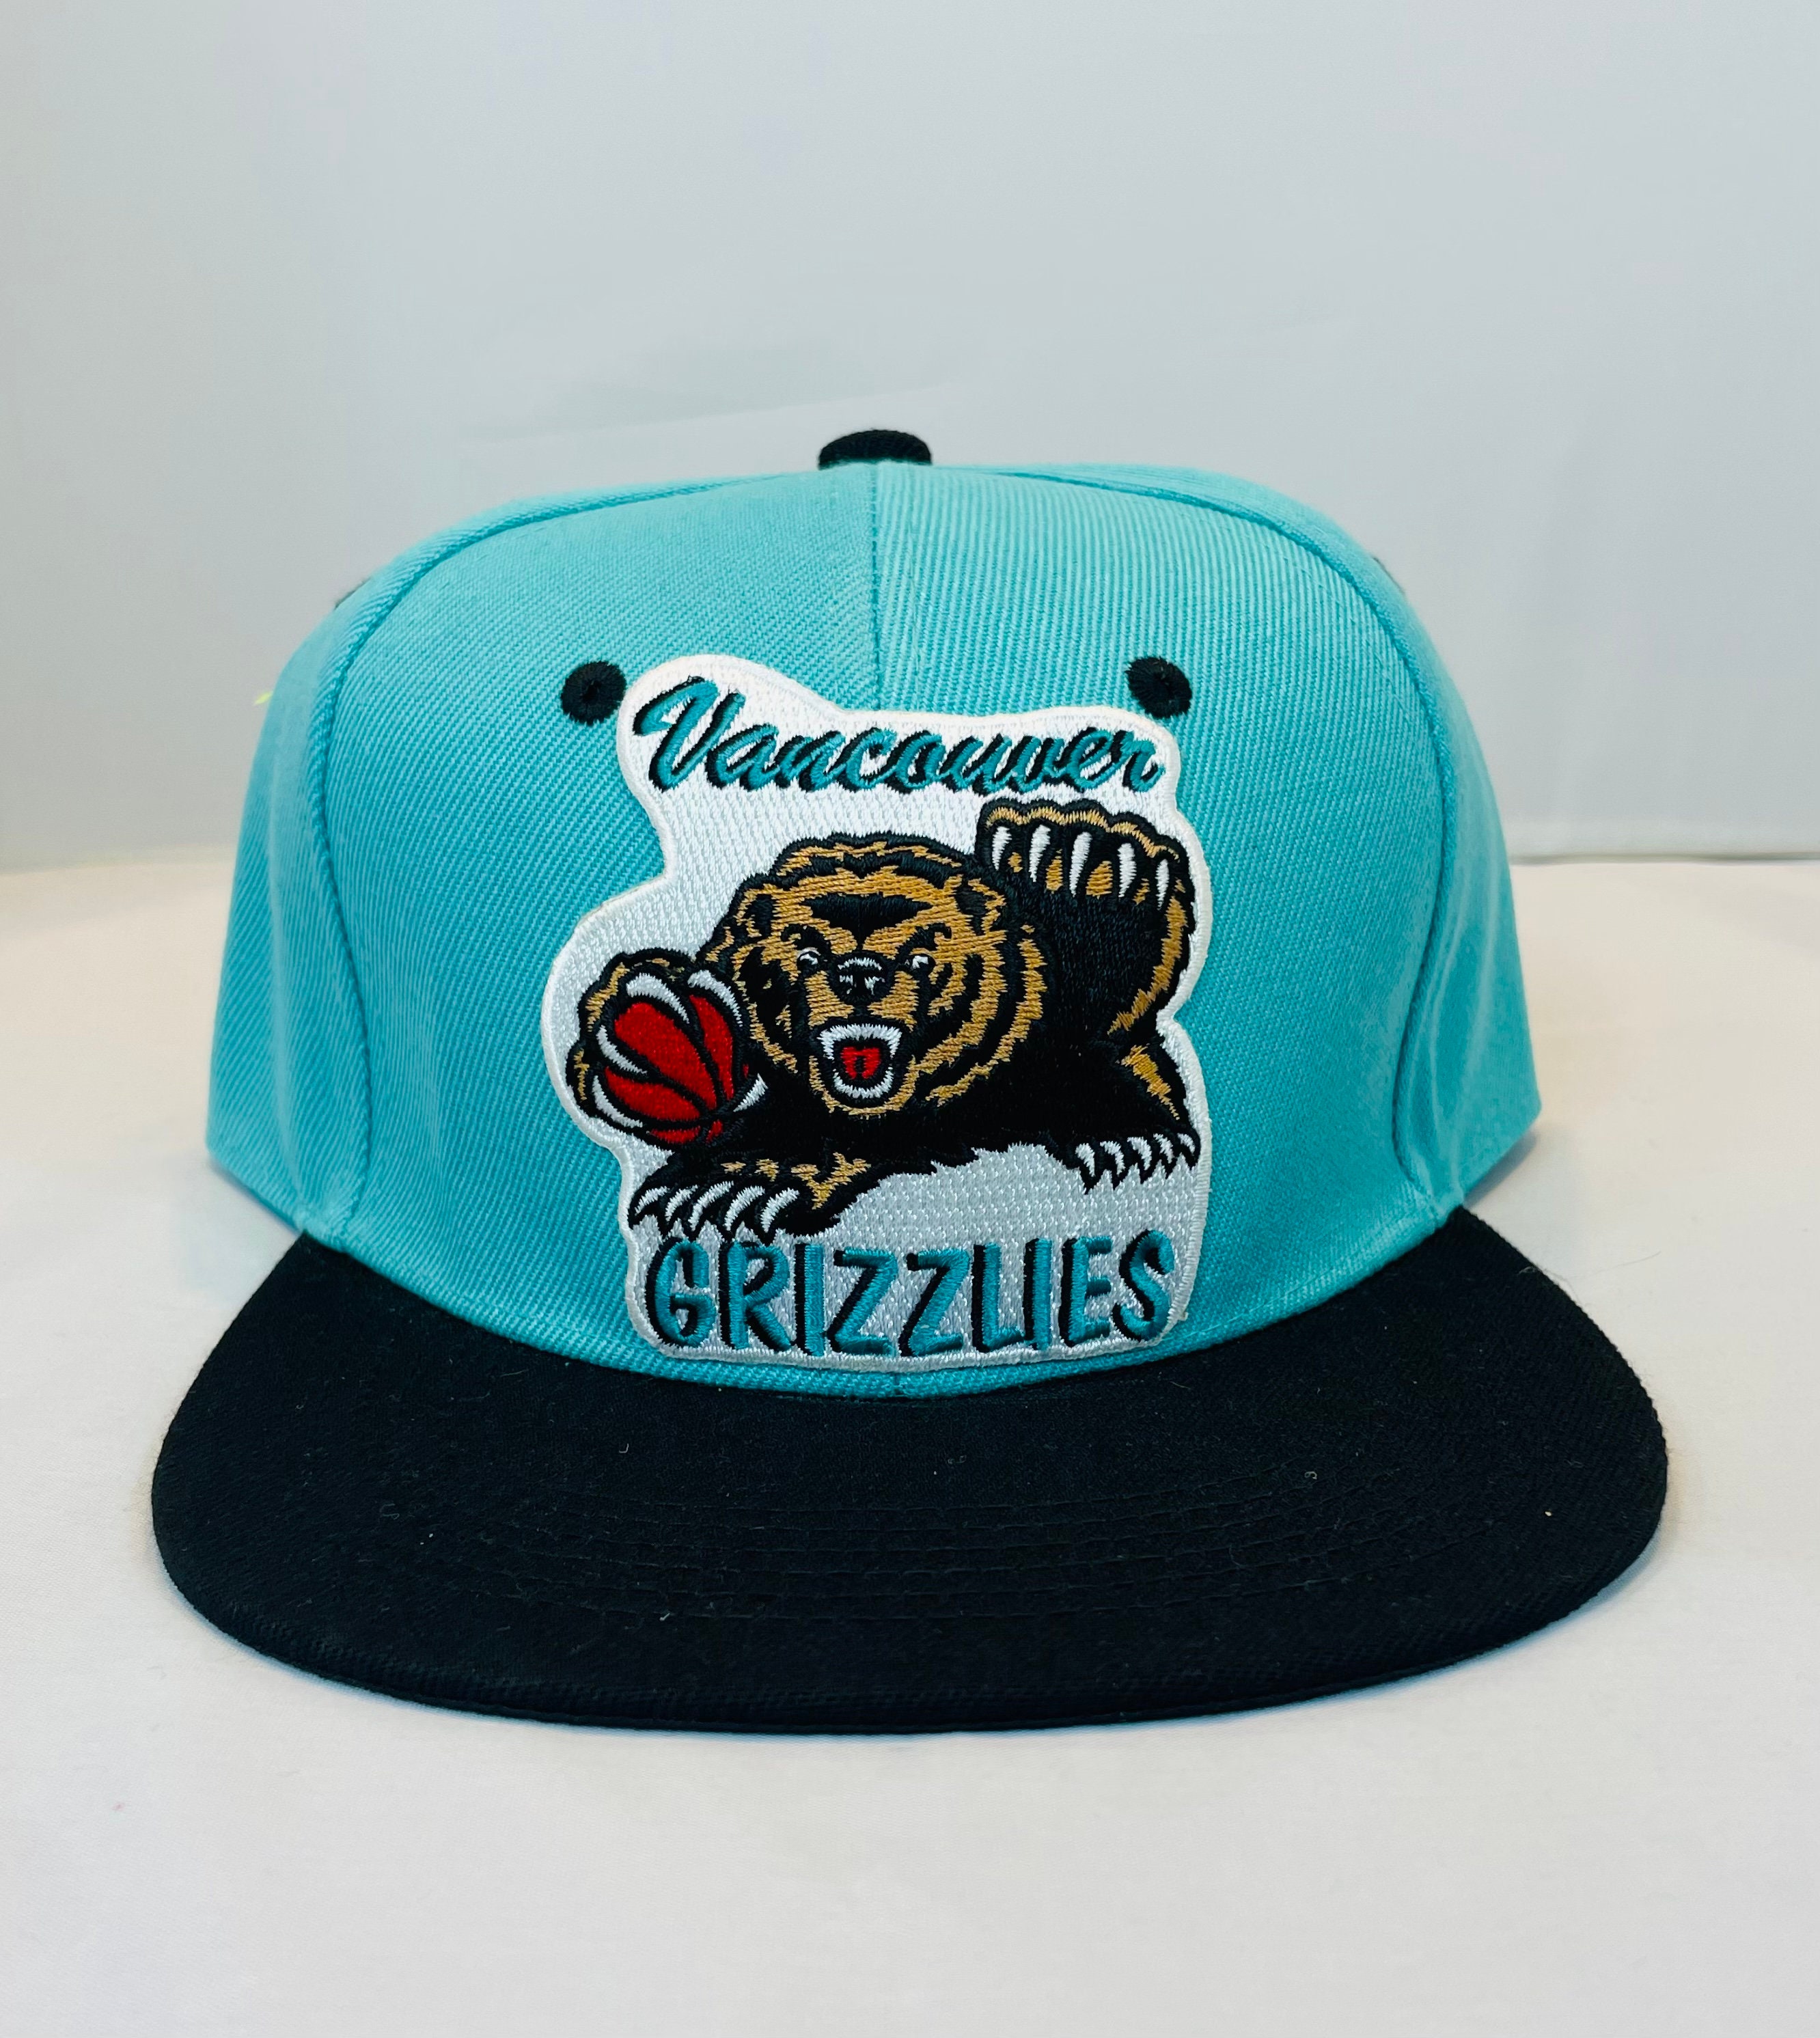 Mitchell & Ness Vancouver Grizzlies Reload Snapback Adjustable Hat Cap  Throwback Memphis - Red & Teal